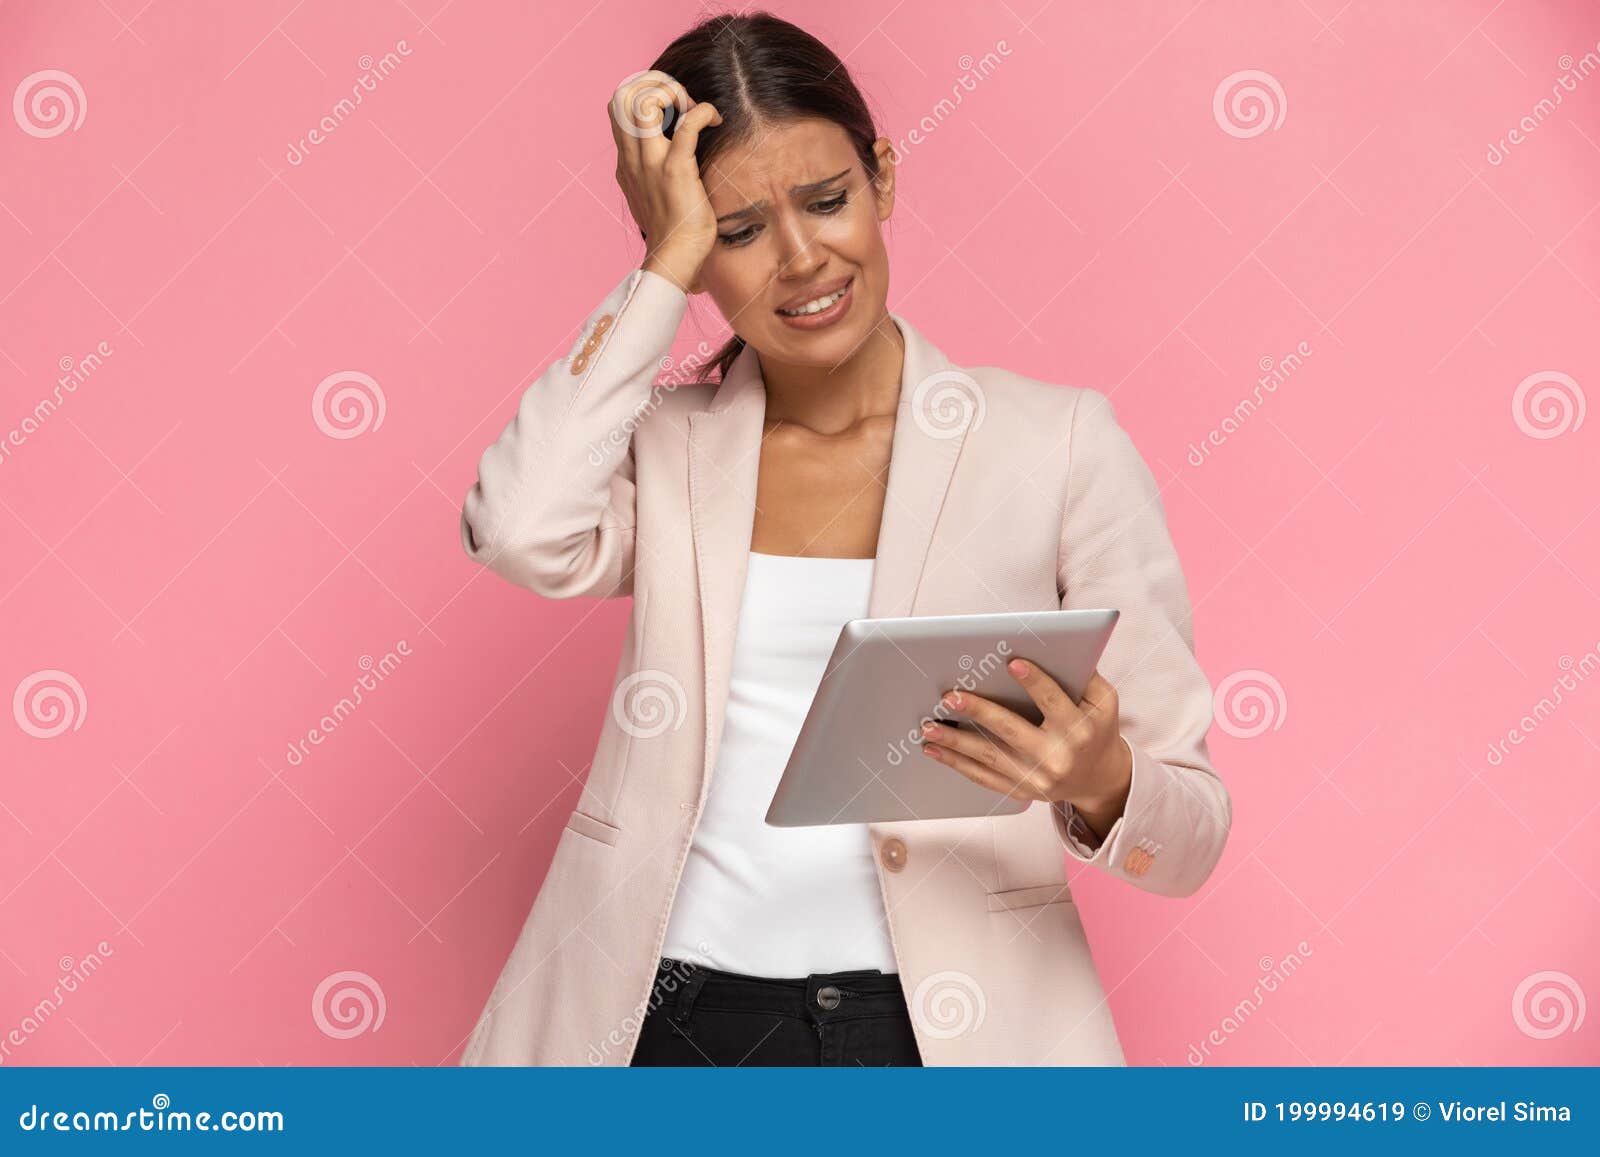 businesswoman looking at her tablet and feeling panicked